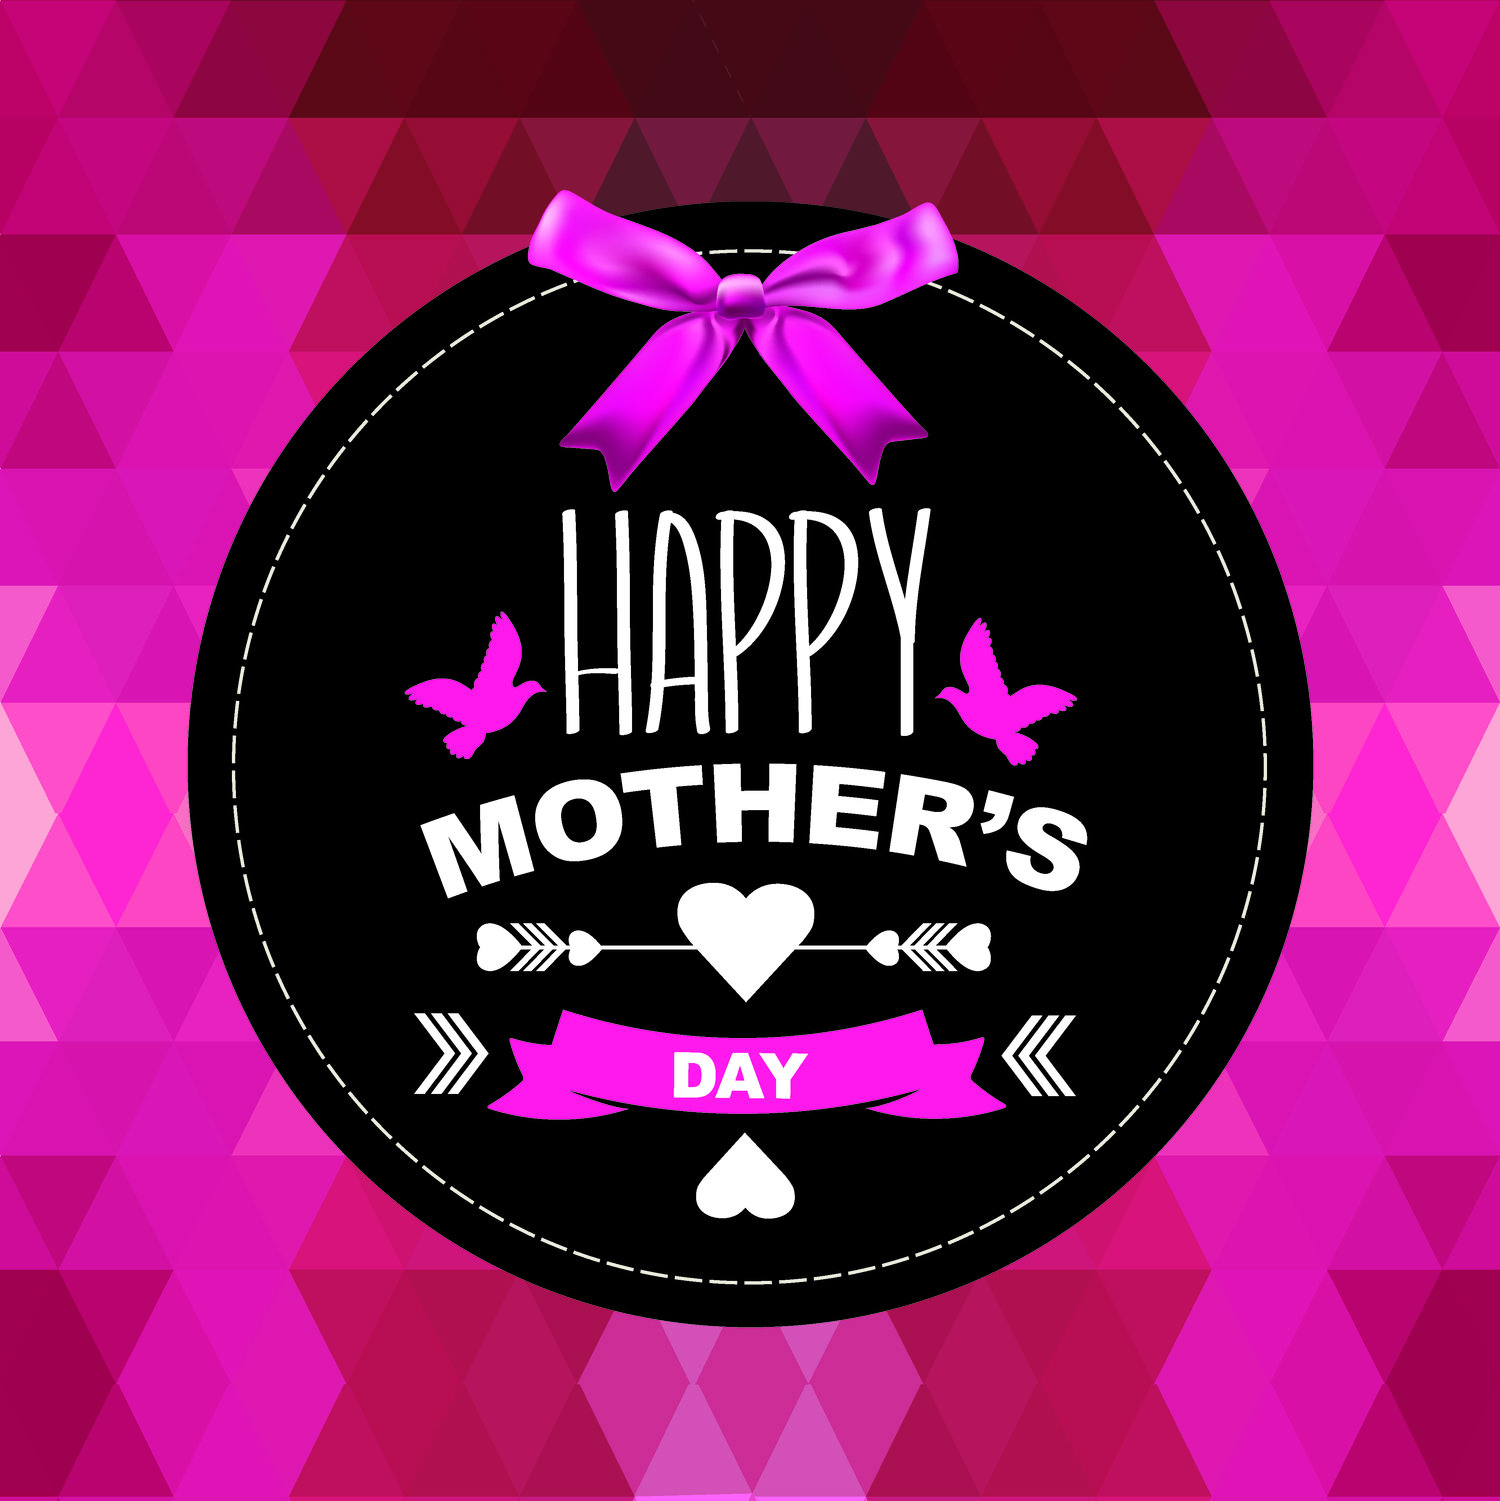 Happy Mother's Day Adorable Greeting Card